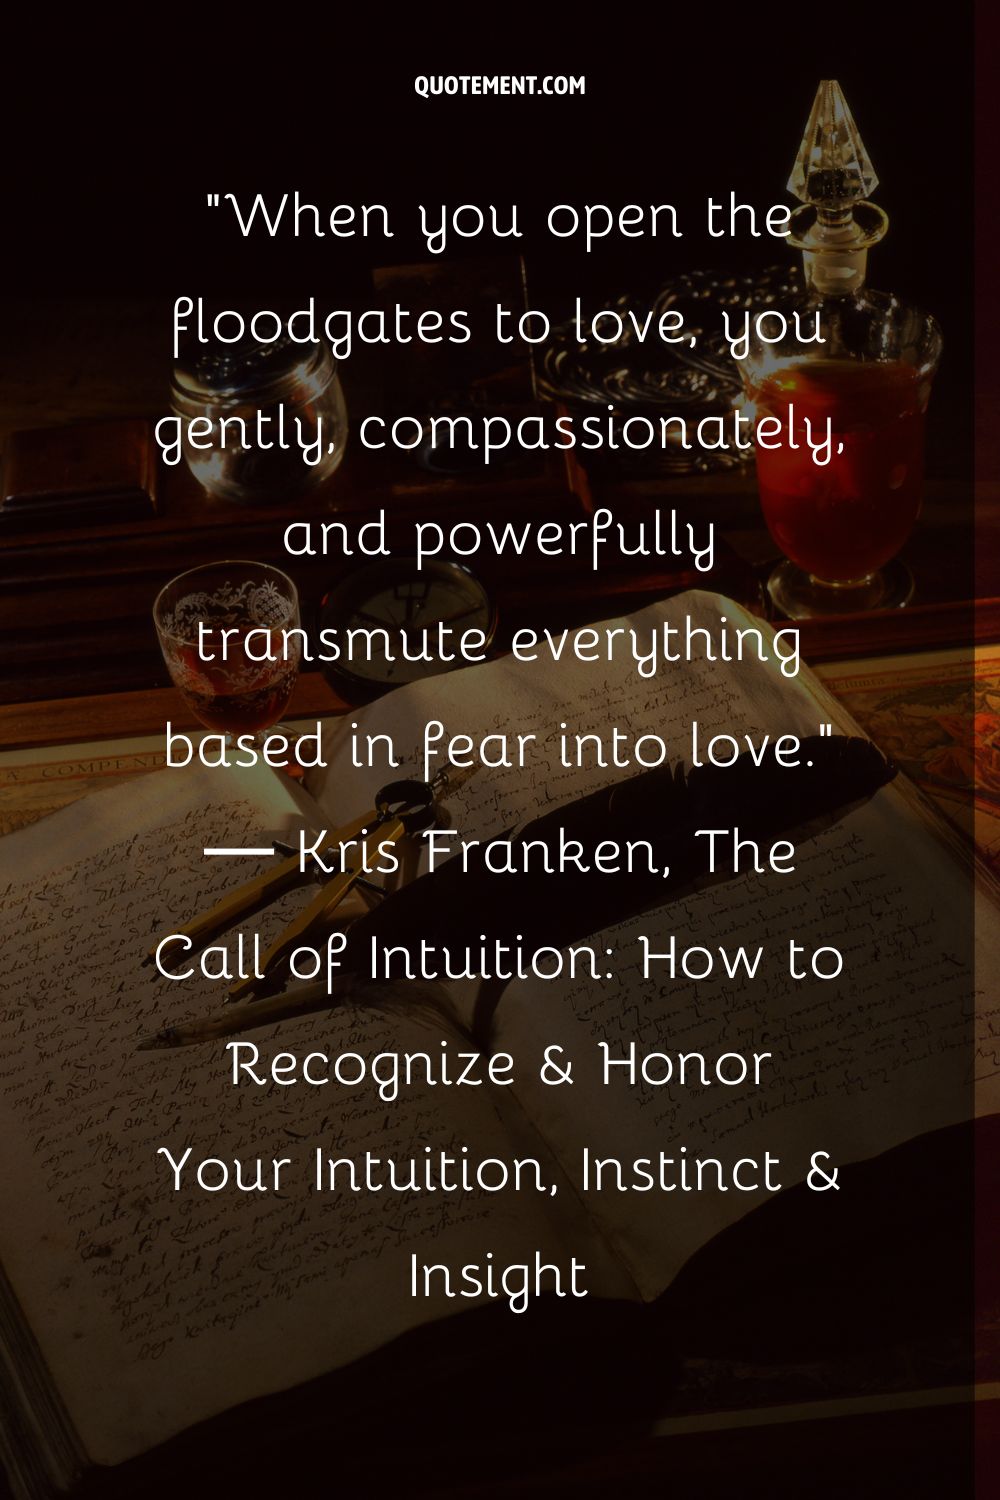 When you open the floodgates to love, you gently, compassionately, and powerfully transmute everything based in fear into love